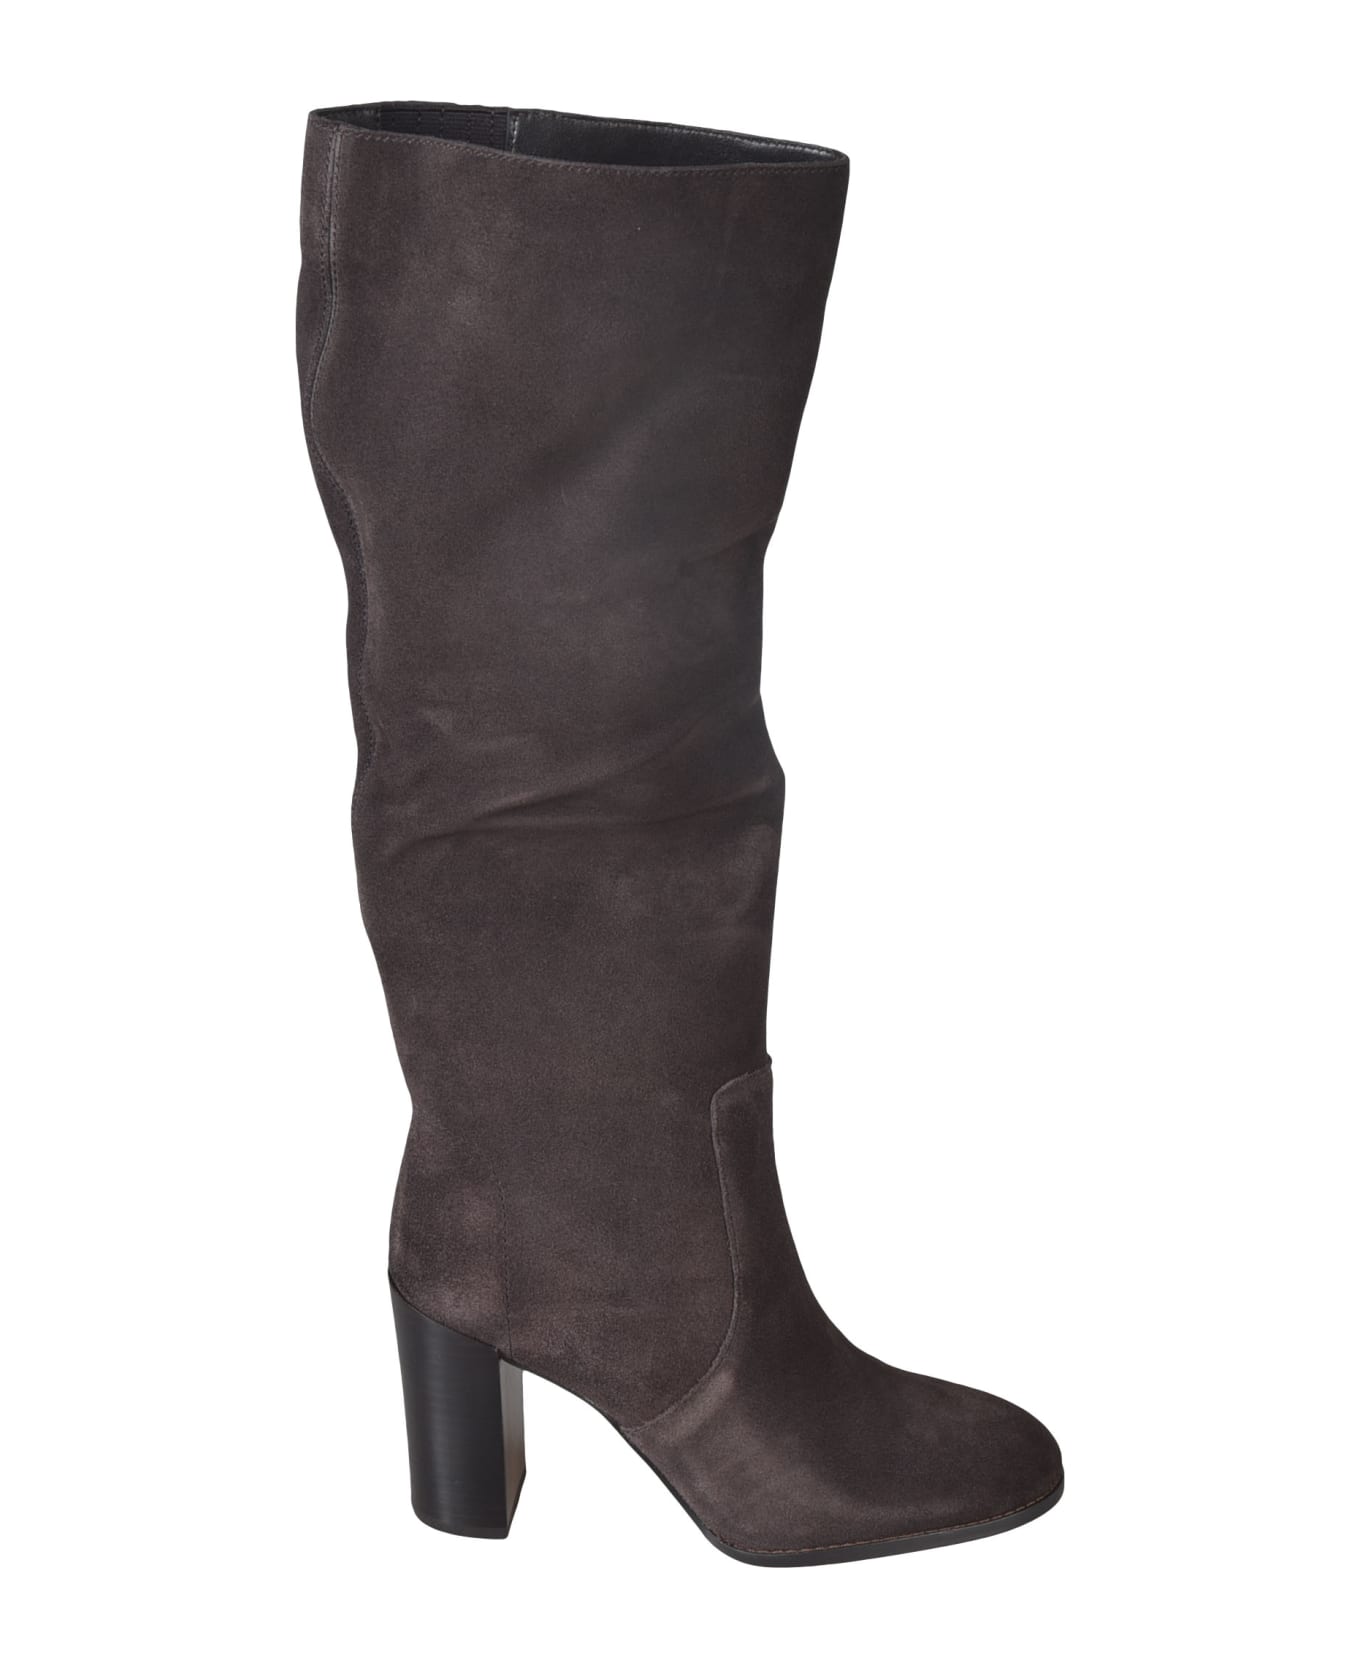 Michael Kors Luella Suede Knee High Boots - Chocolate